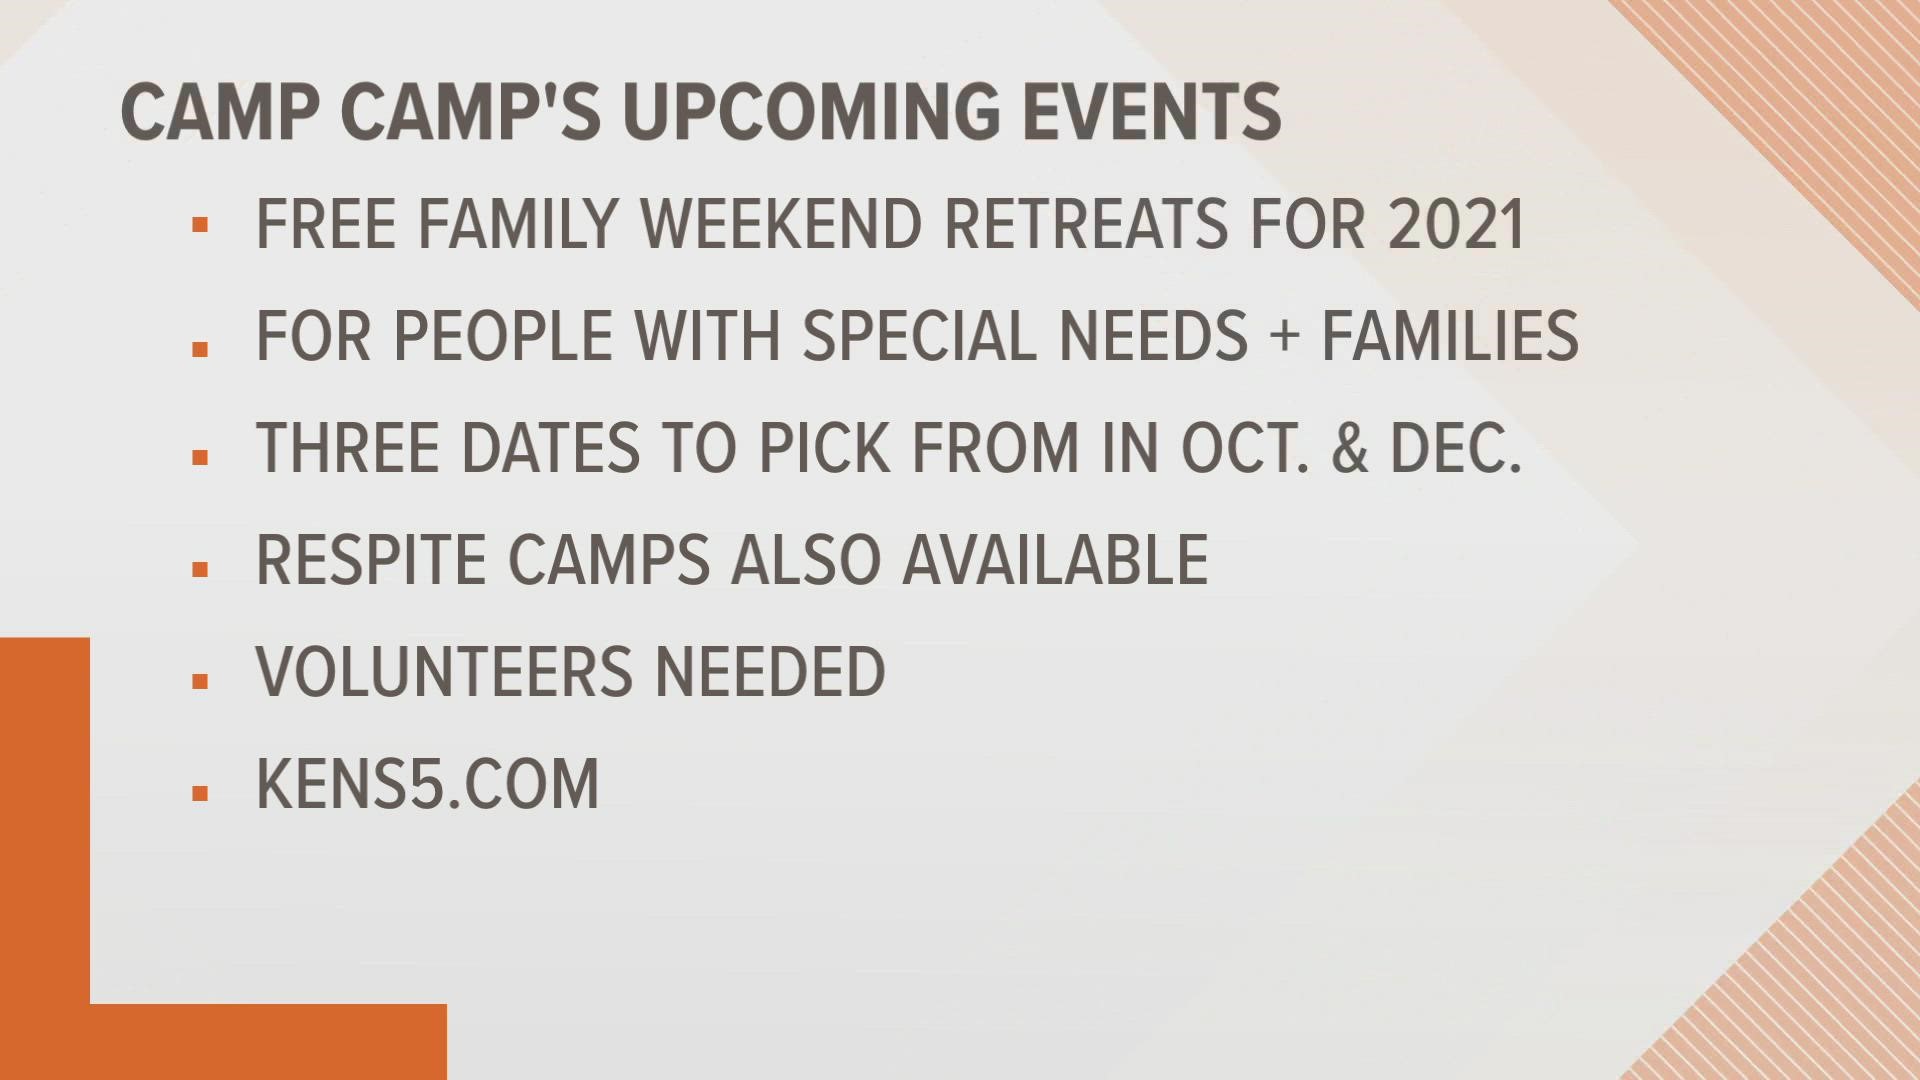 One of the things Camp Camp is offering is a free weekend family retreat which gives you the chance to reconnect with your loved ones.